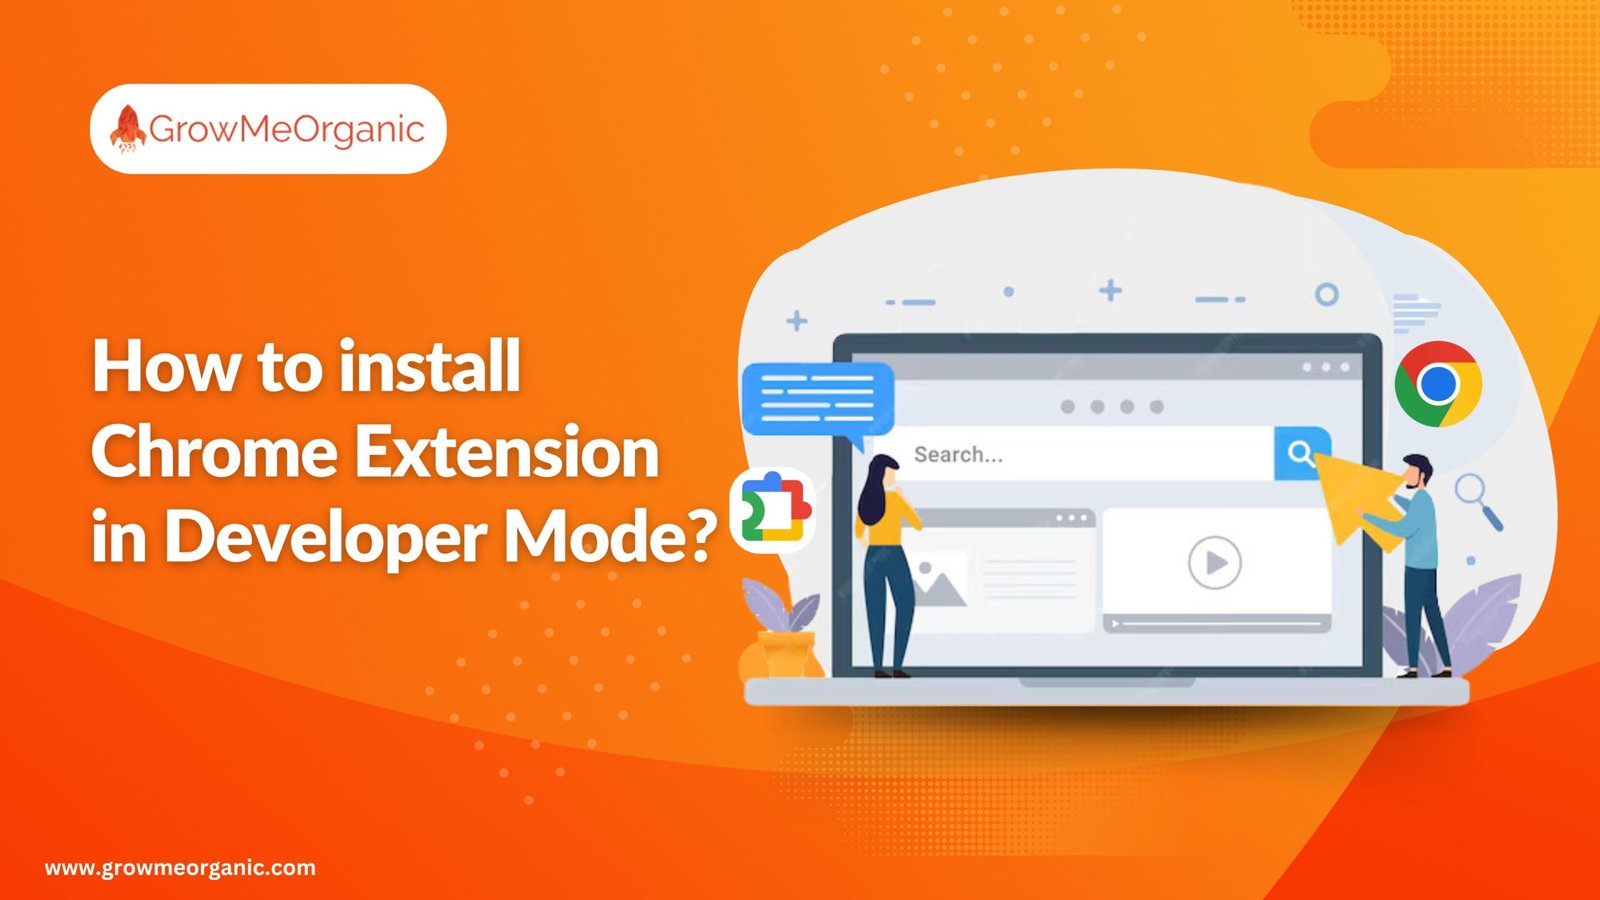 How to install Chrome Extension in Developer Mode?